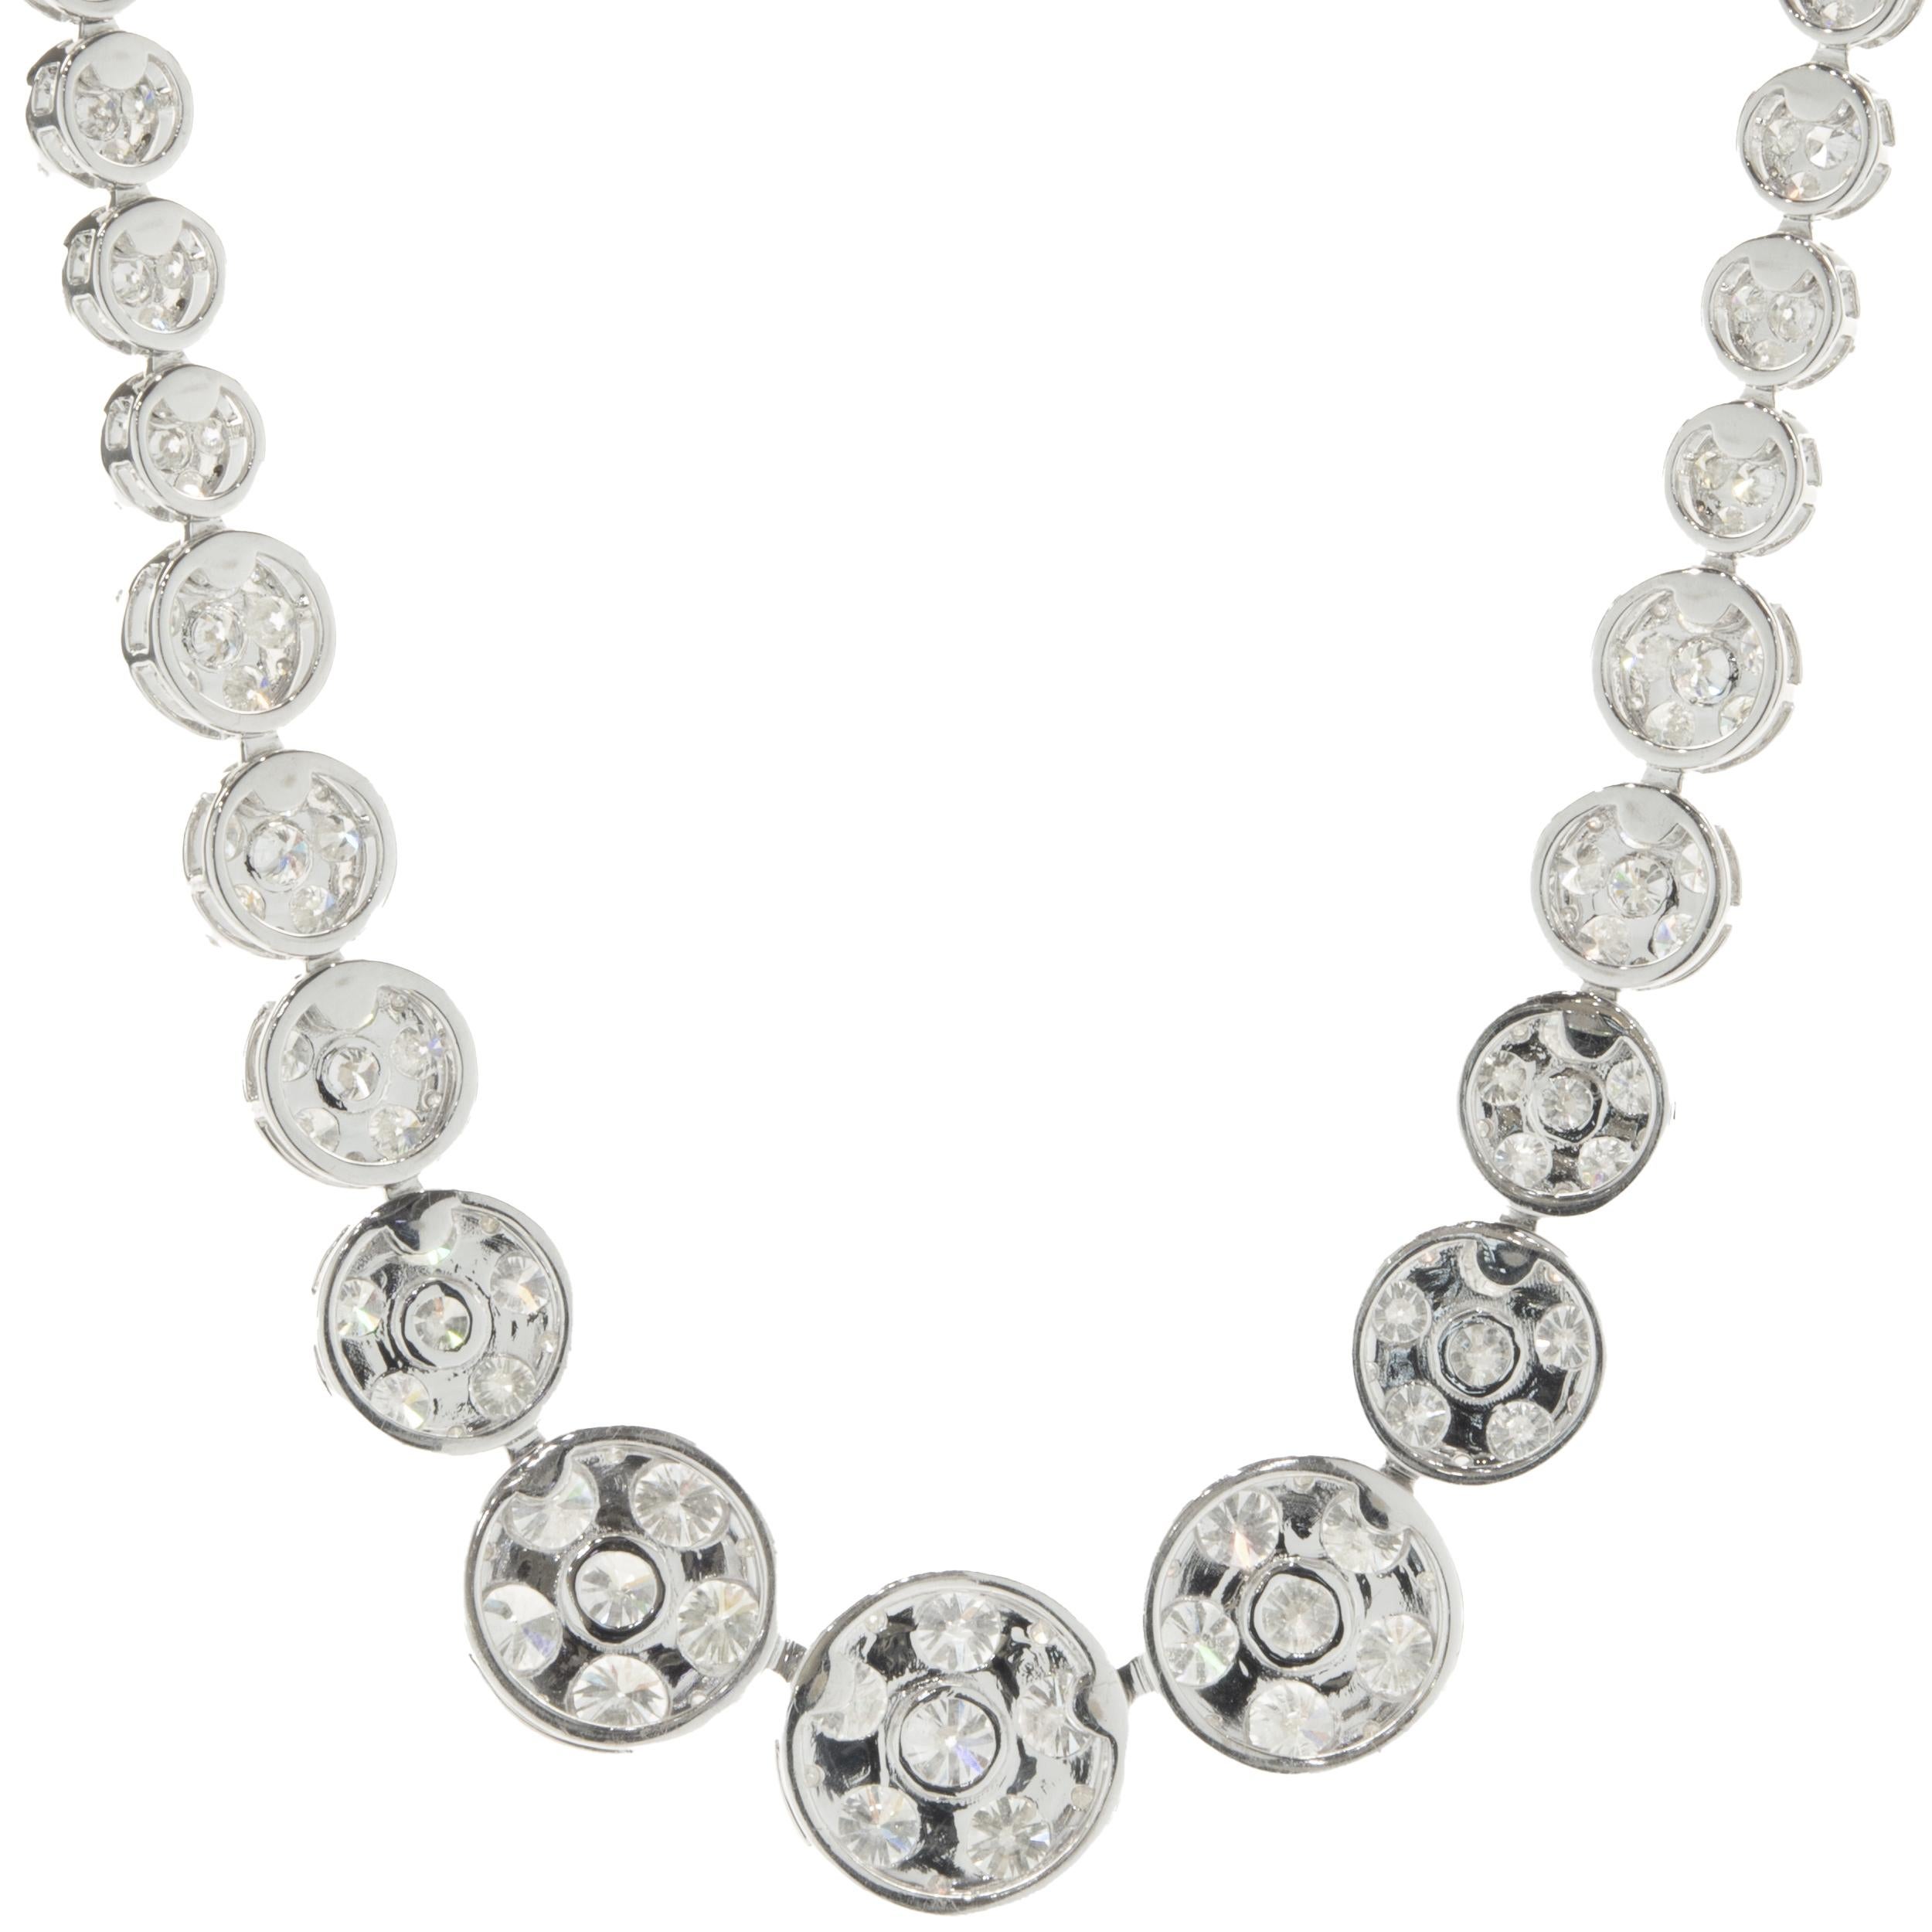 Designer: custom design
Material: 18K white gold
Diamond: 660 round brilliant cut = 26.01cttw
Color: G / H / I
Clarity: VS2-SI1
Dimensions: necklace measures 16.5-inches in length
Weight: 41.74 grams